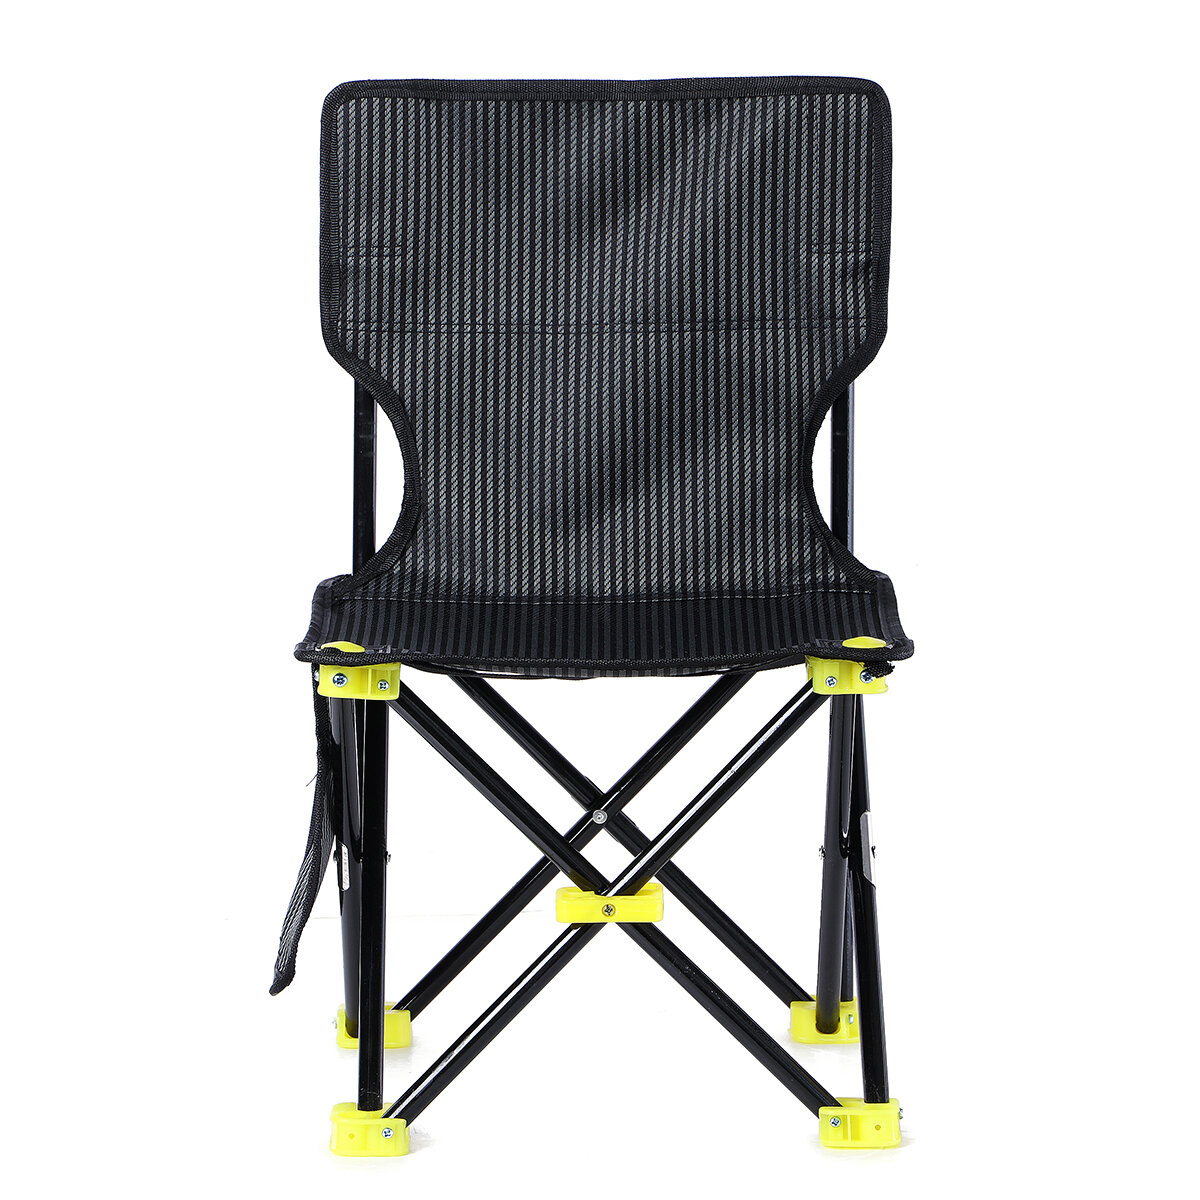 Outdoor Folding Chair Portable Camping Picnic BBQ Seat Stool Max Load 200kg 